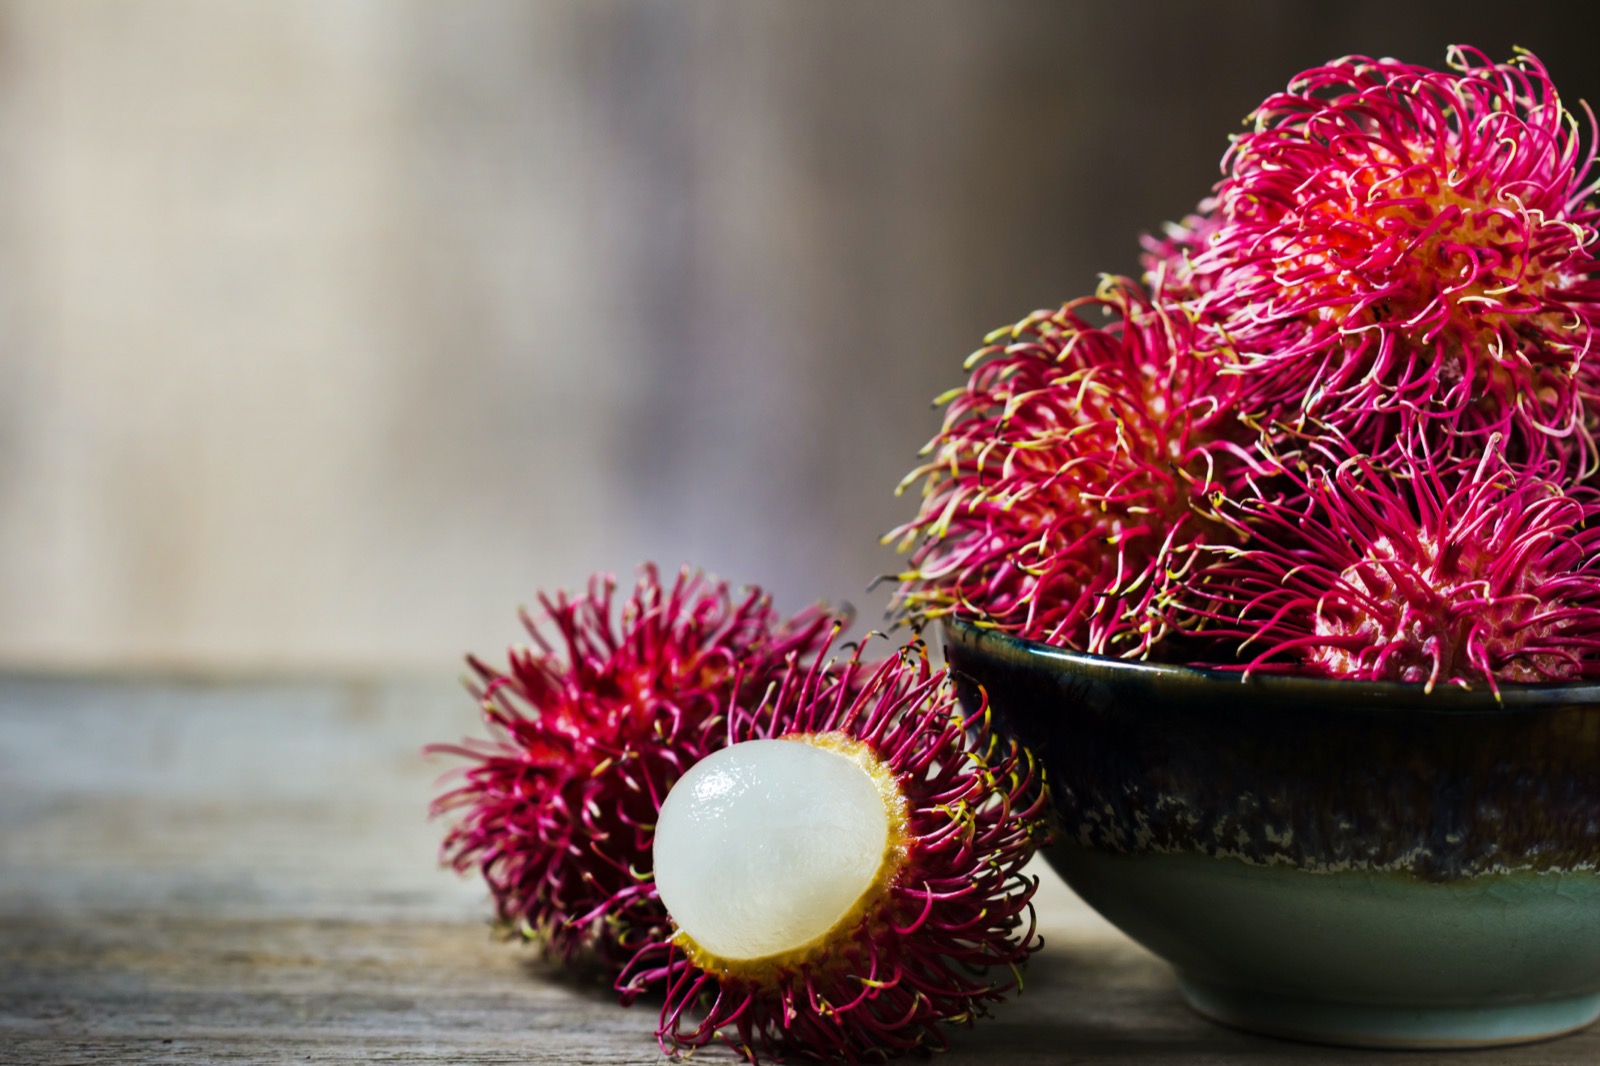 🍍 You Haven’t Really Lived Unless You’ve Tried at Least 12 of These Tropical Fruits Rambutan